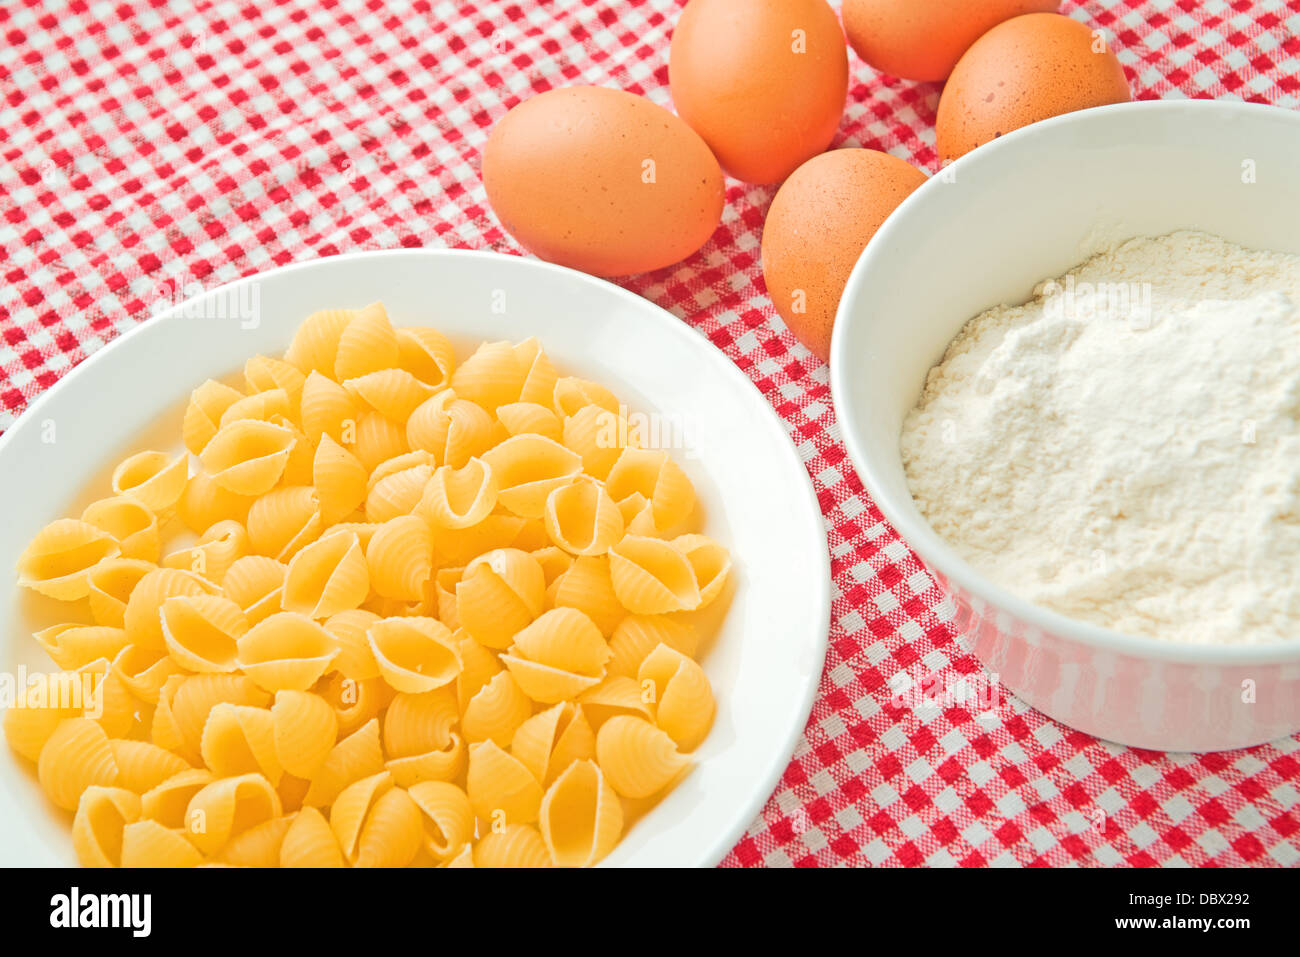 Flour, eggs and pasta on kitchen table, raw food ingredients. Stock Photo